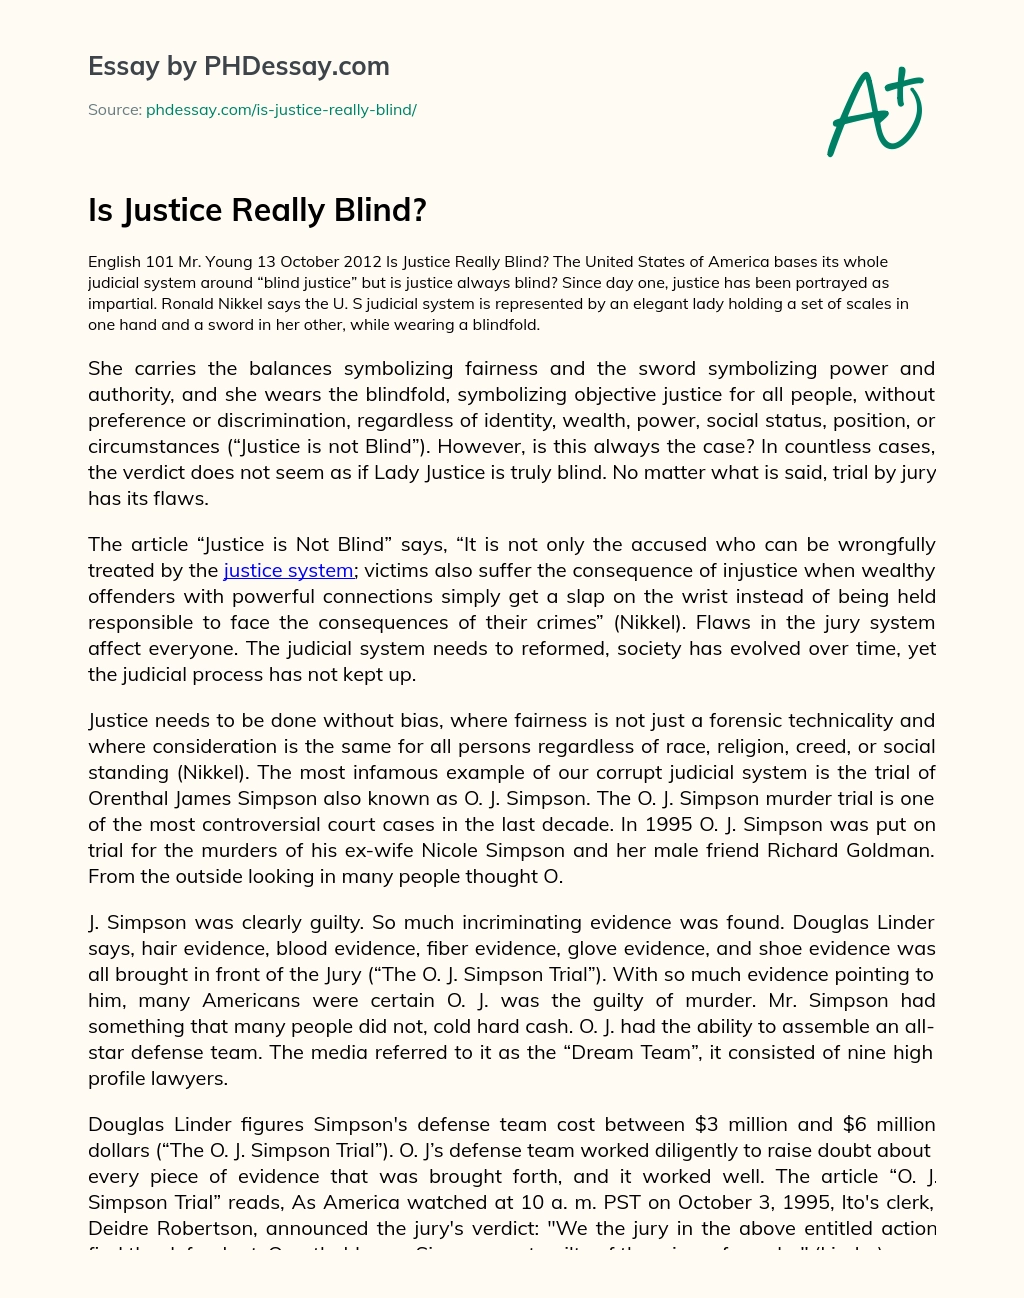 Is Justice Really Blind? essay